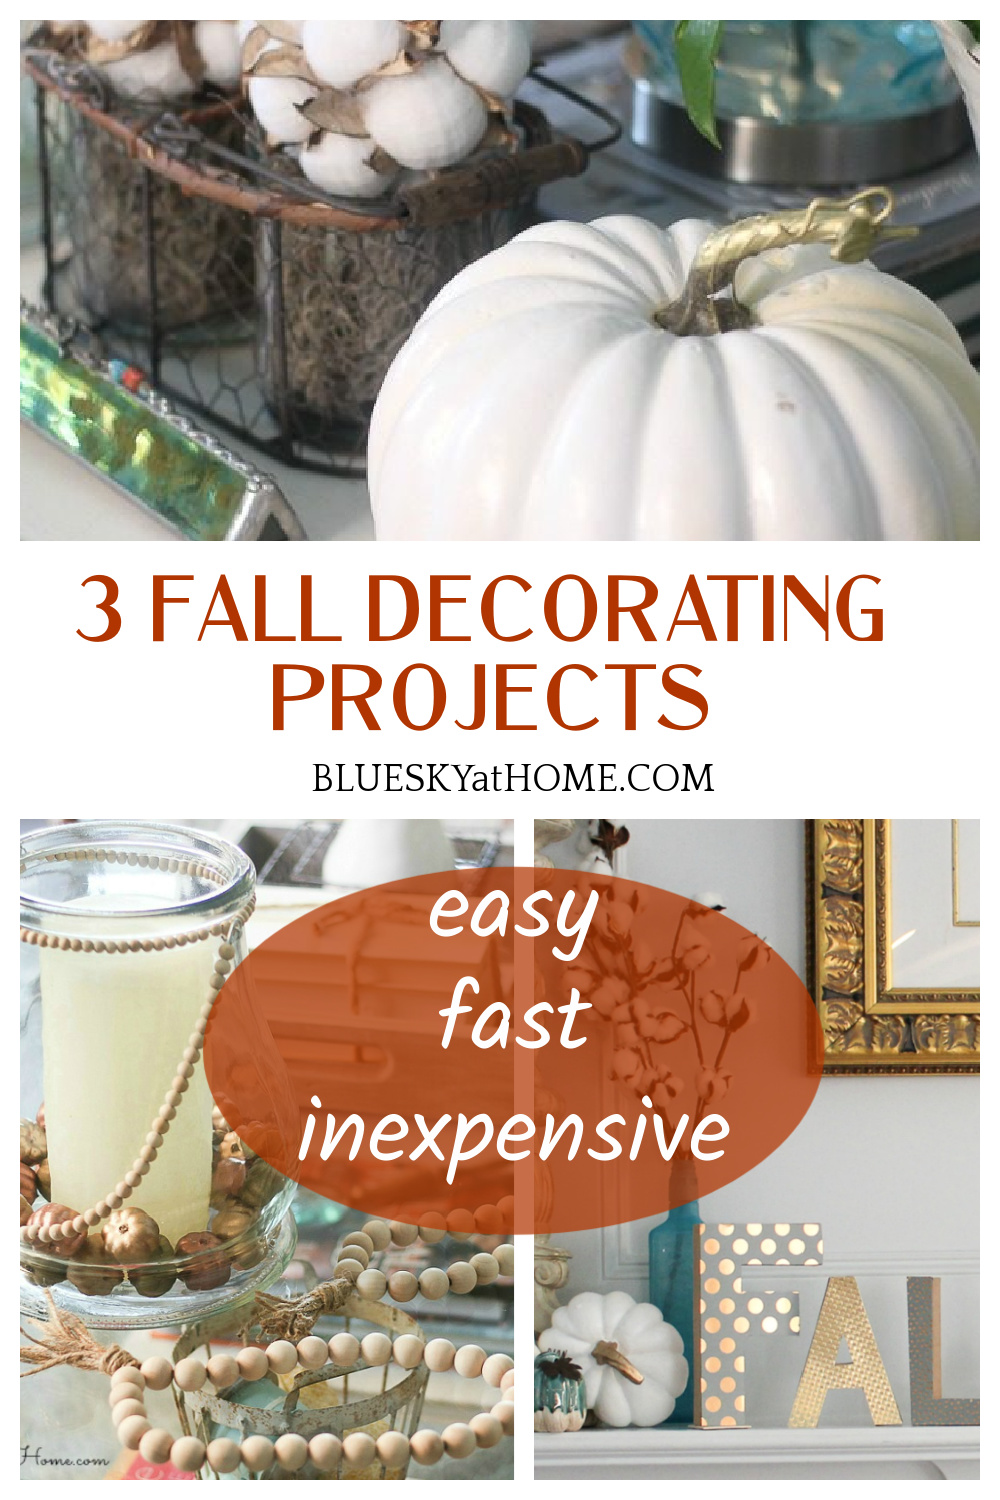 3 Easy Fall Diy Decorating Projects To Make In 1 Day Bluesky At Home